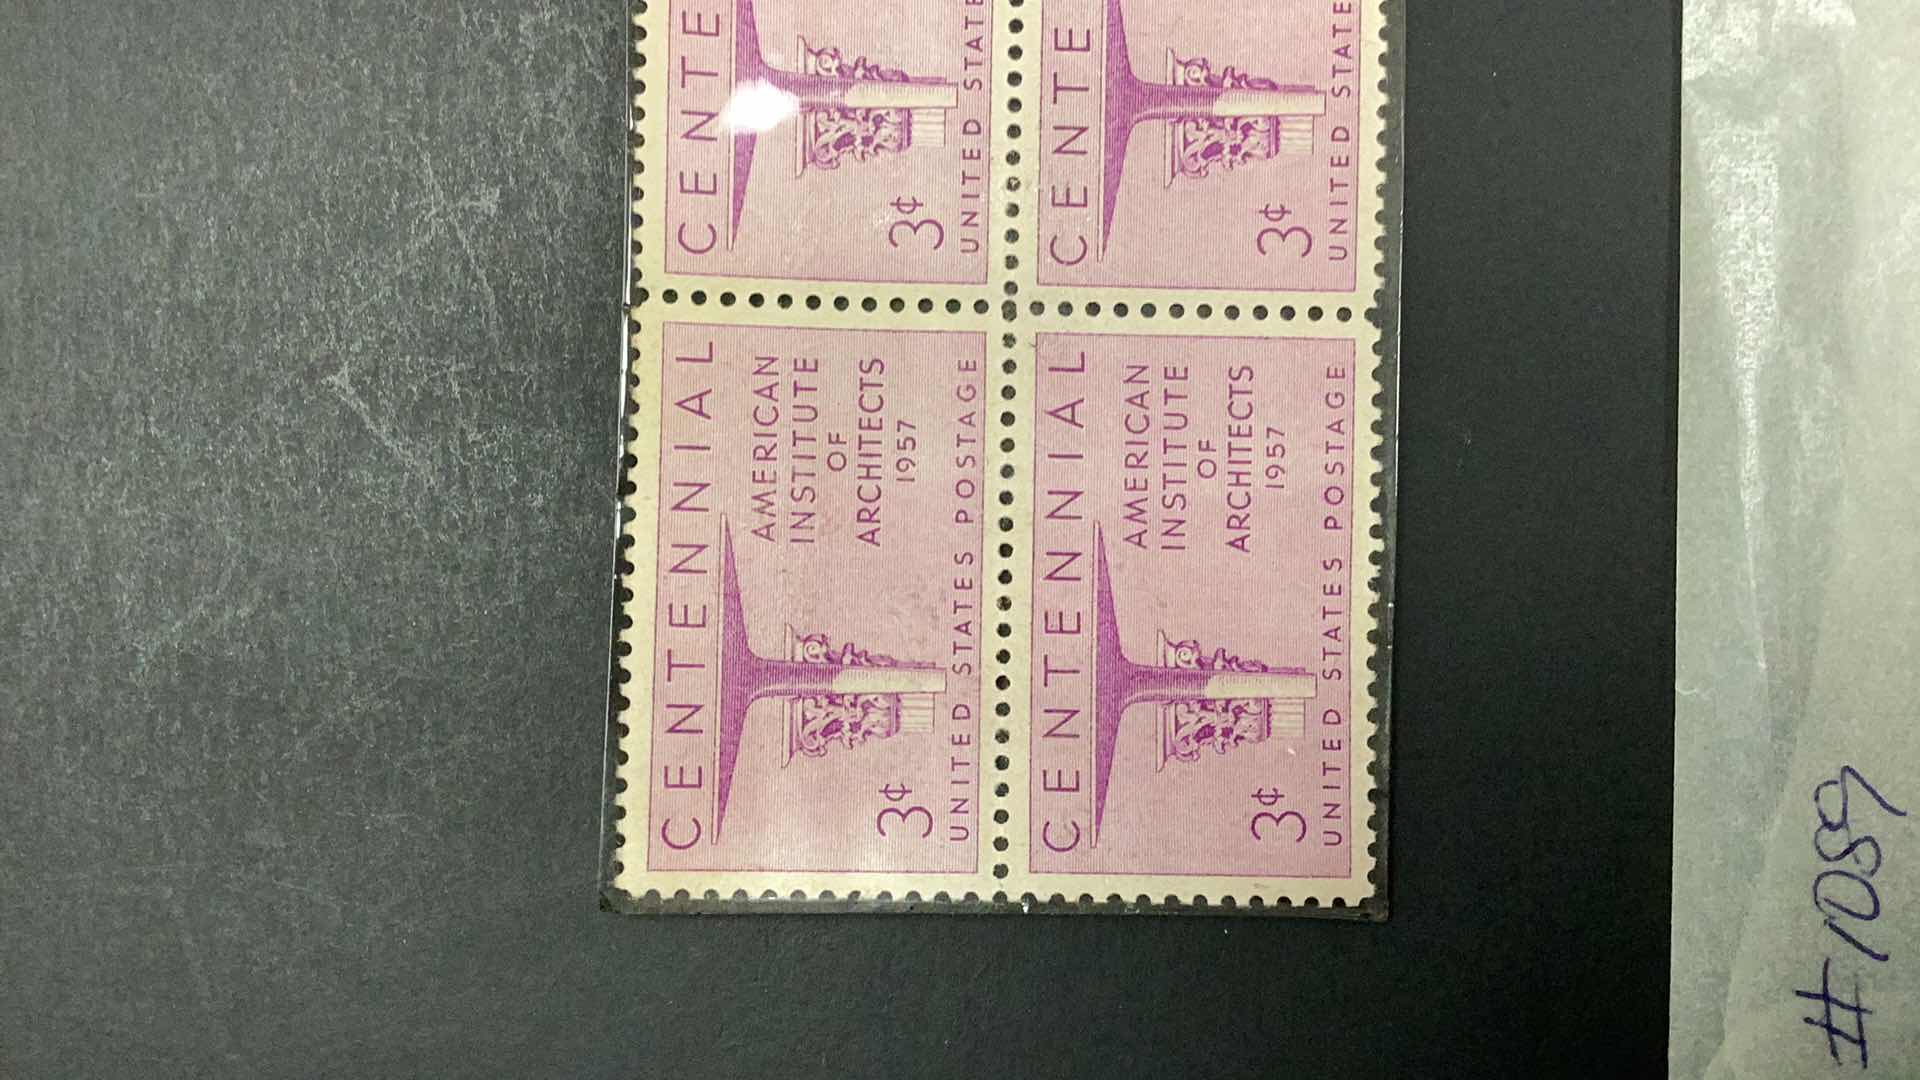 Photo 2 of STAMPS UNITED STATES CENTENNIAL AMERICAN INSTITUTE OF ARCHITECTS #1089 1957 BLOCK OF 4